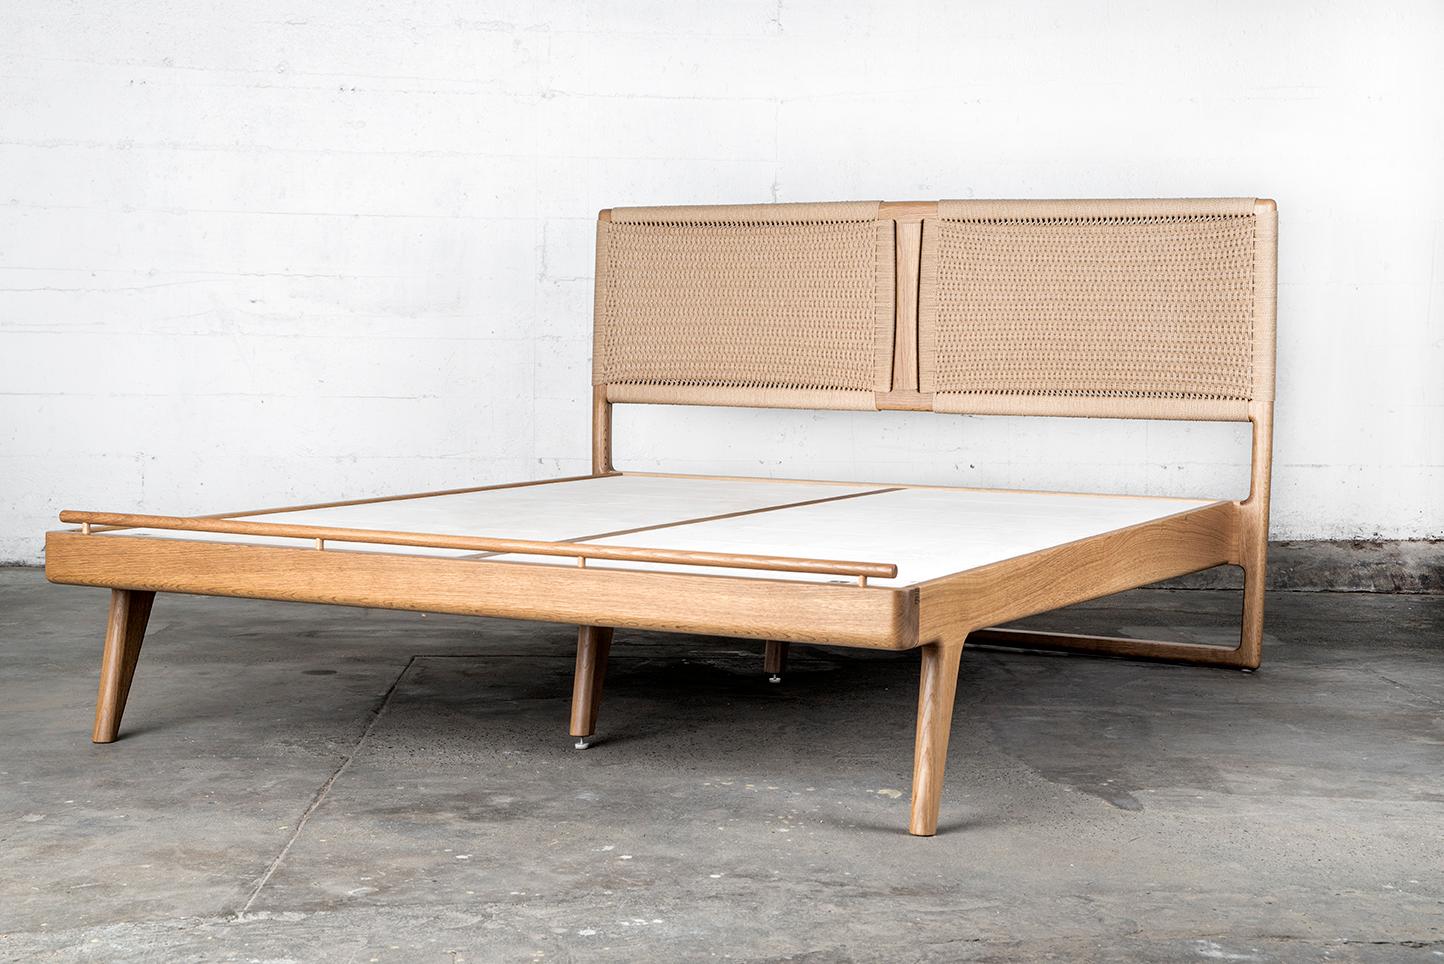 Contemporary Bed, Cali King, Danish Cord, Woven Headboard, Mid-Century Modern-Style, Hardwood For Sale